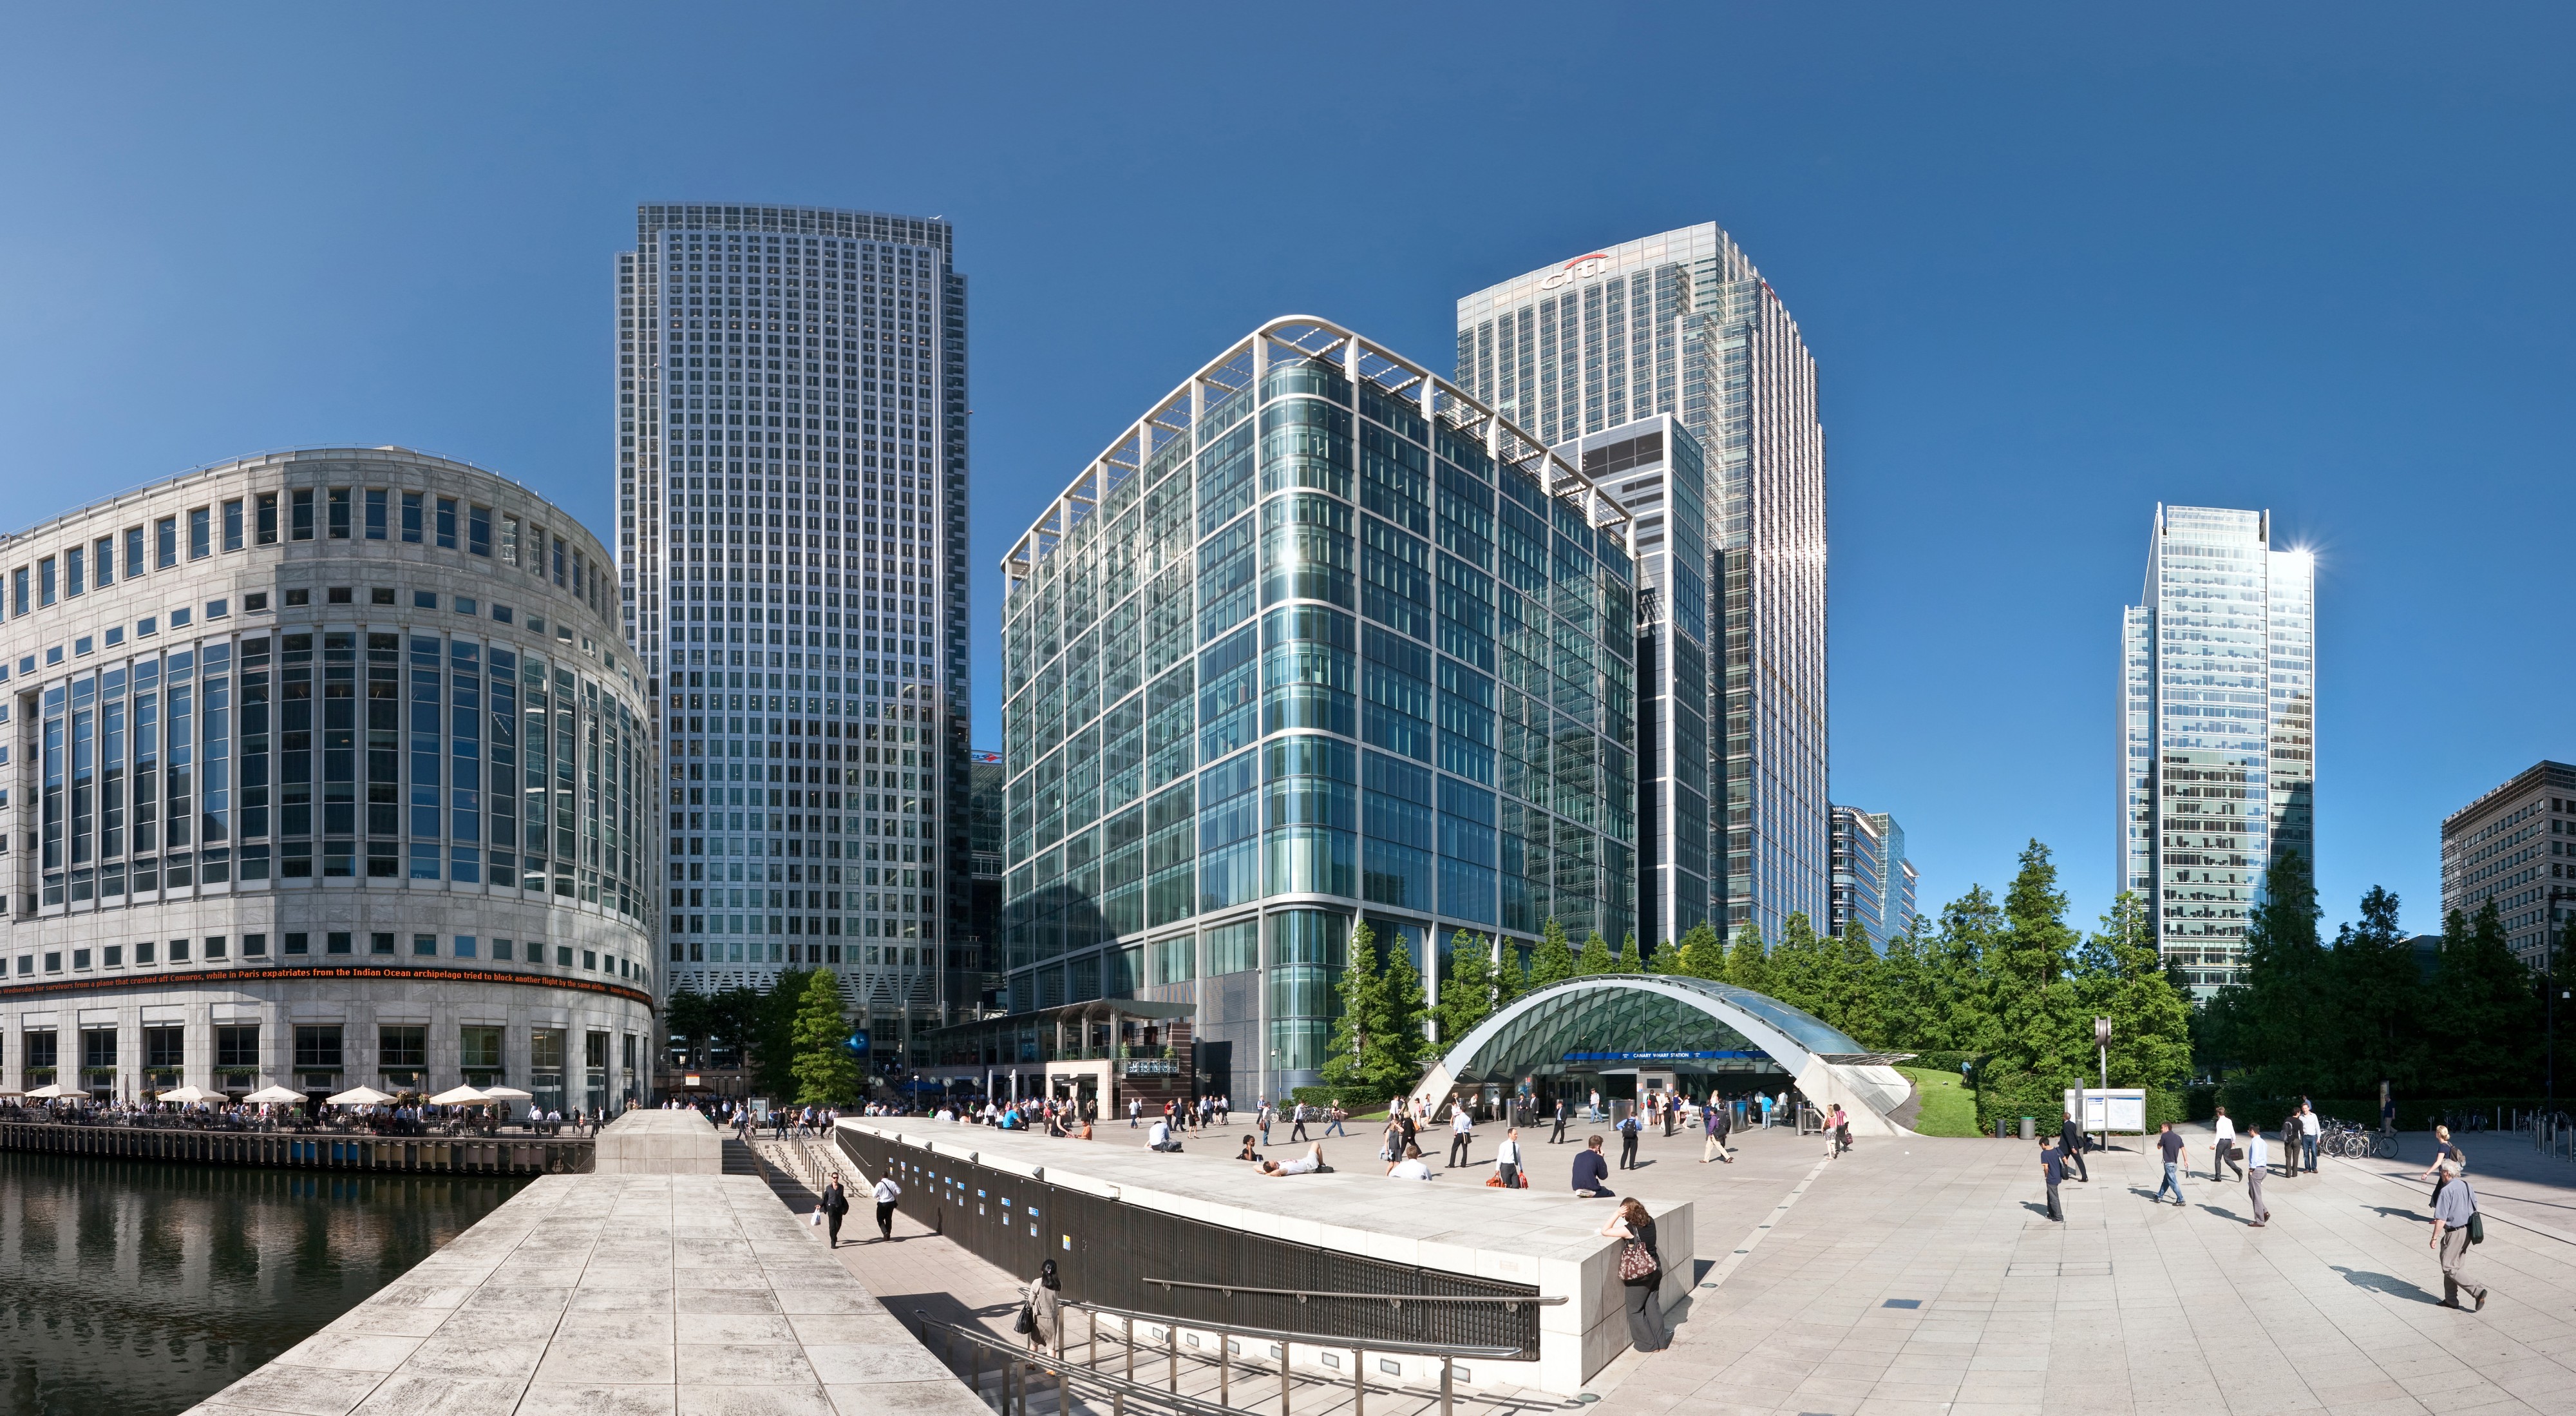 Canary Wharf Wide View 2, London - July 2009